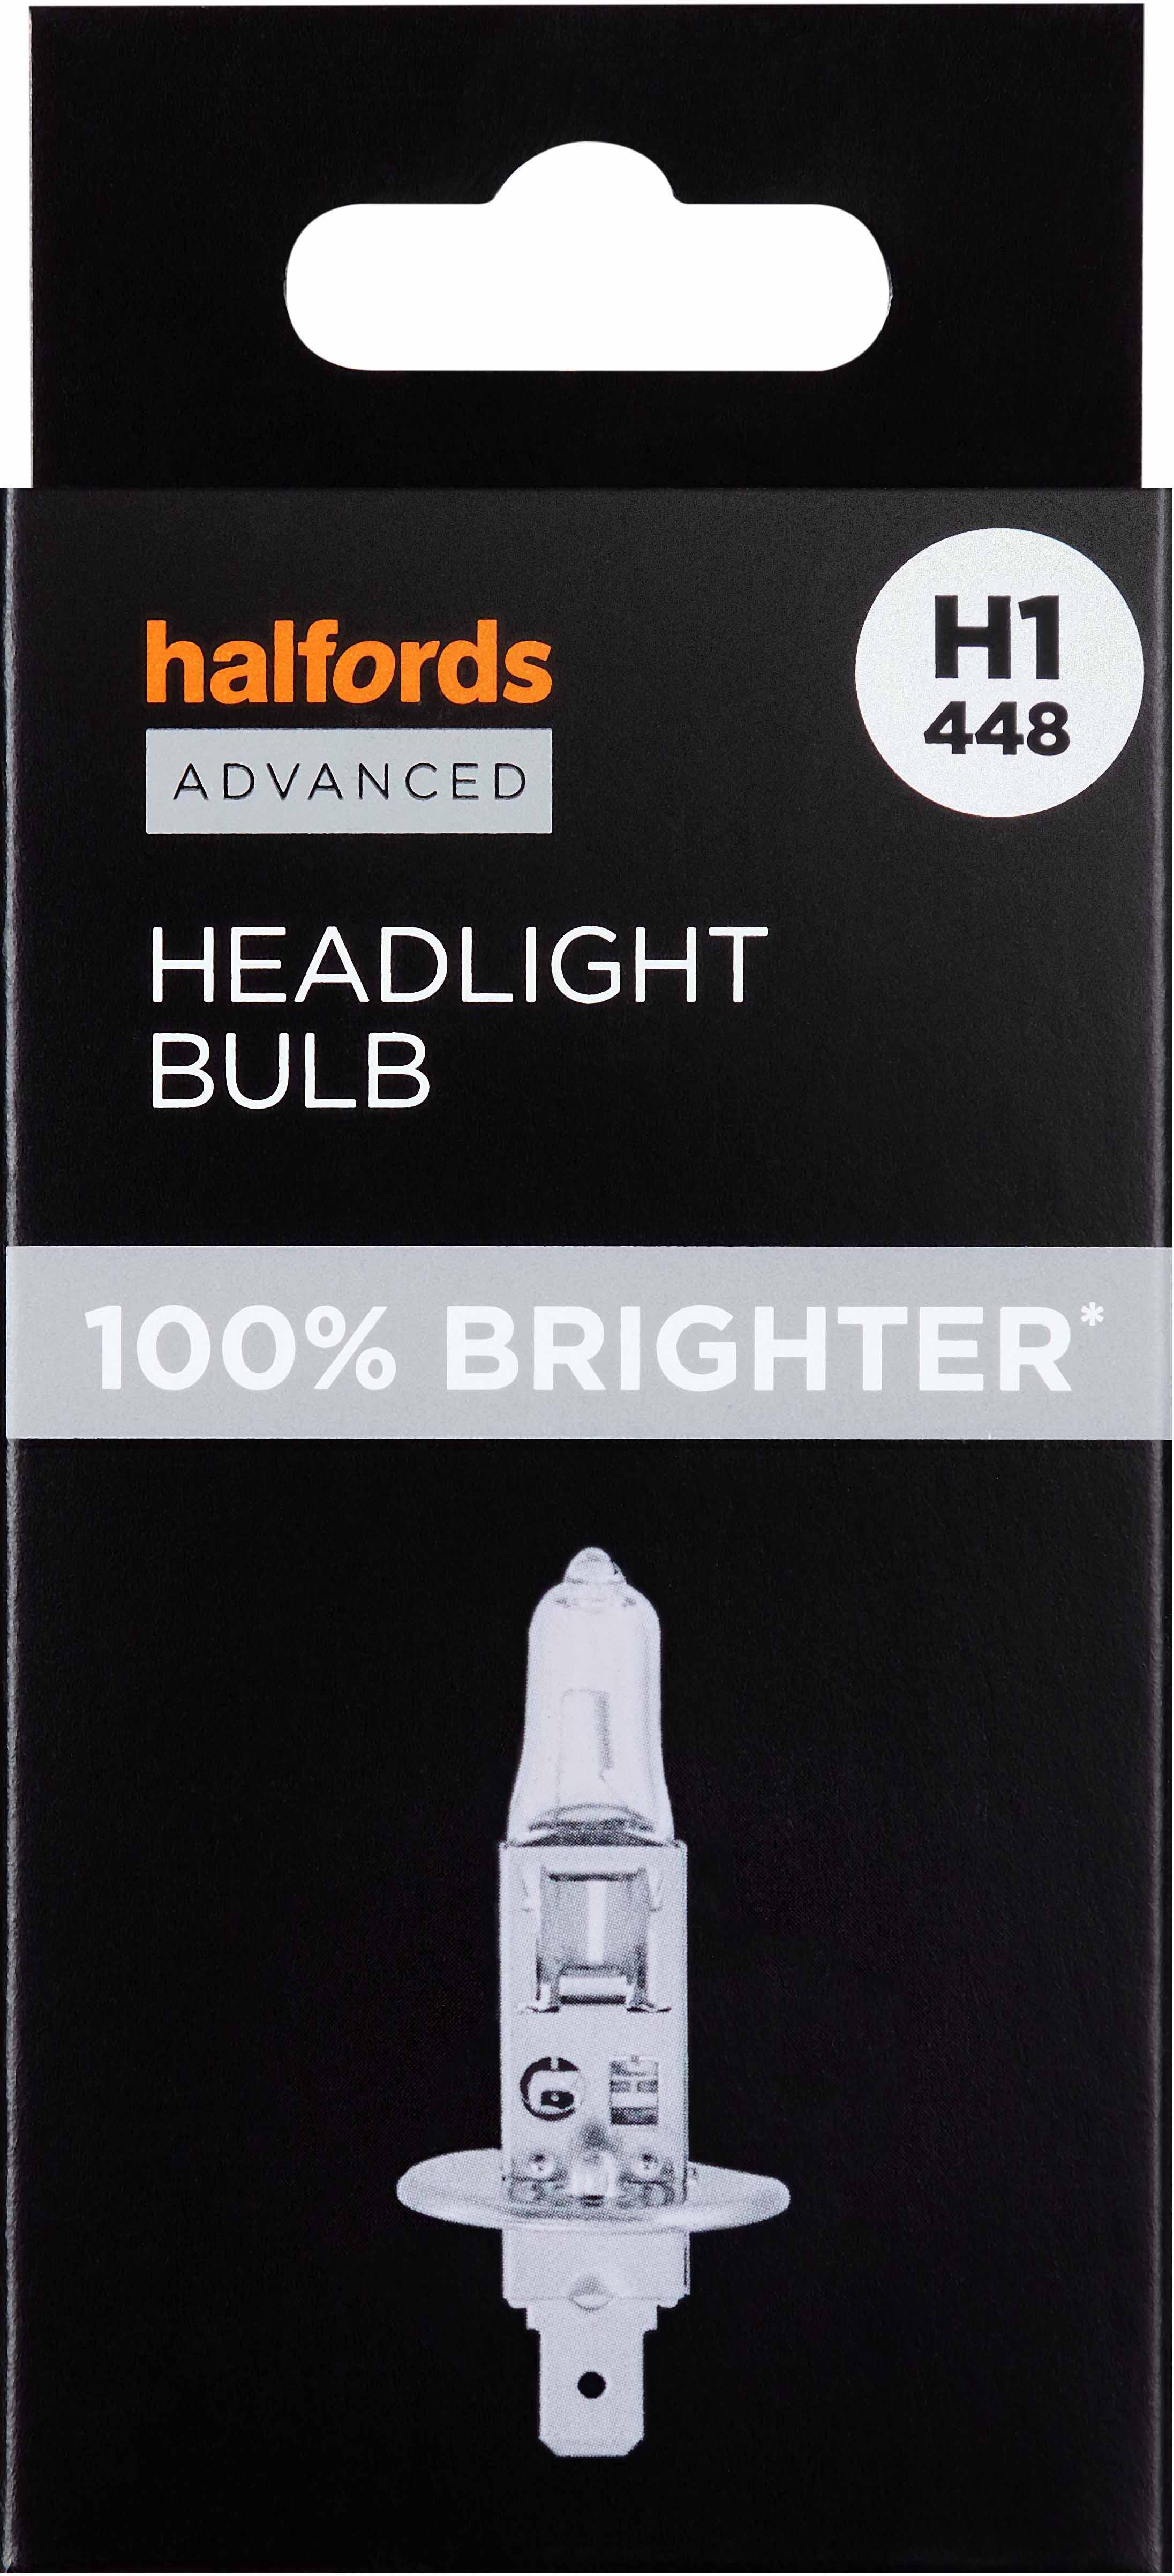 H1 448 Car Headlight Bulb Halfords Advanced Up To +100 Percent Brighter Single Pack